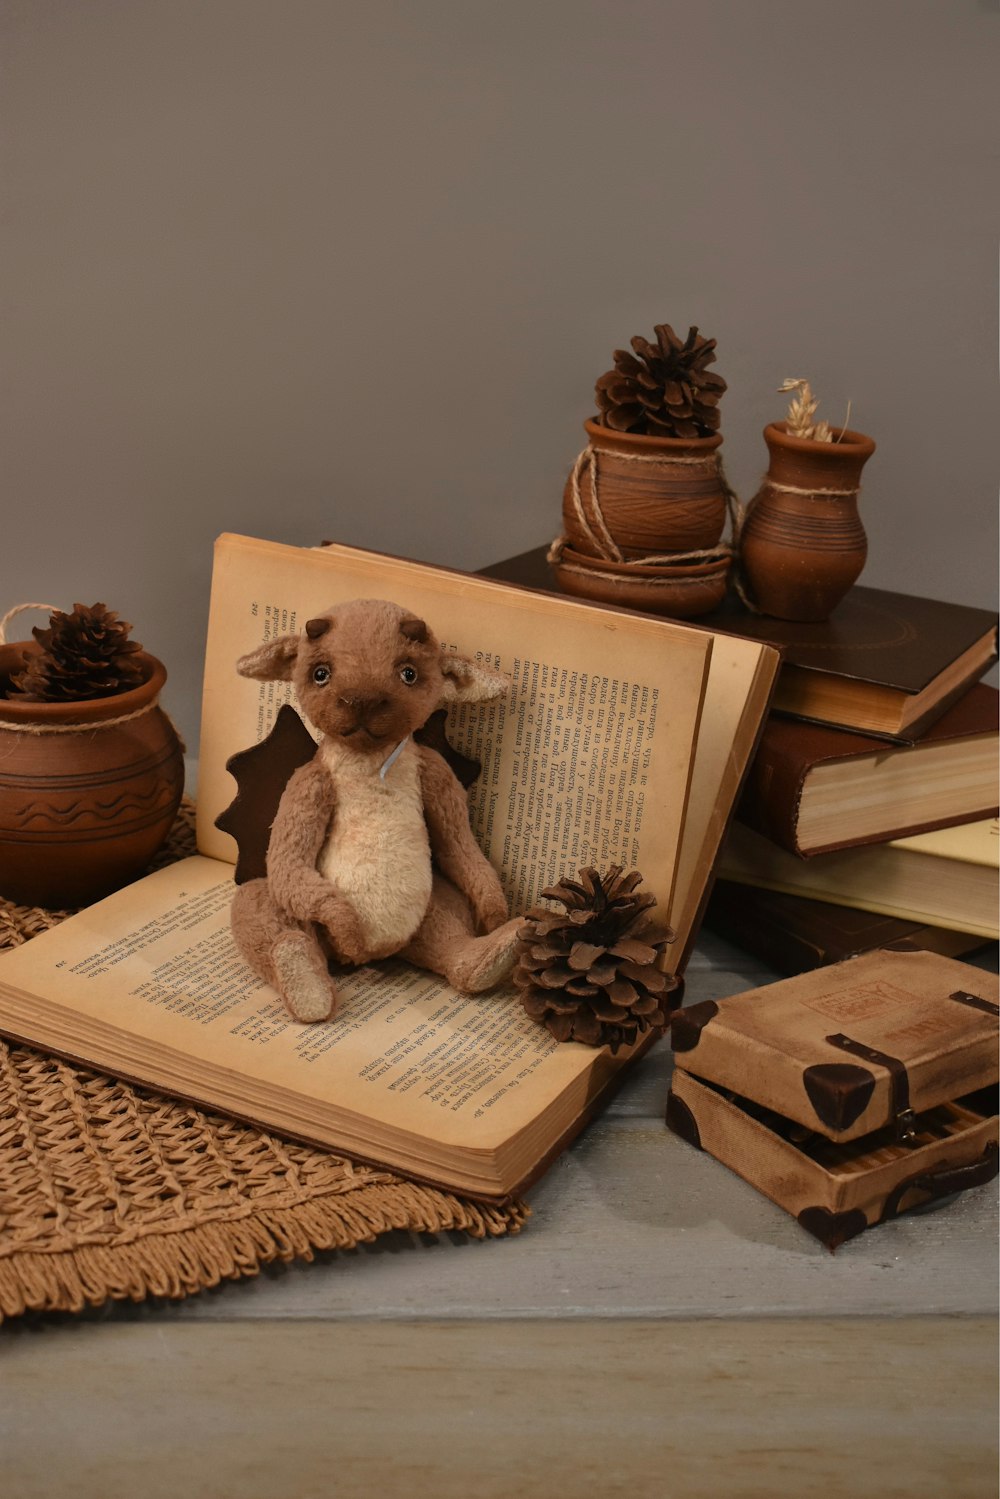 a stuffed animal sitting on top of an open book